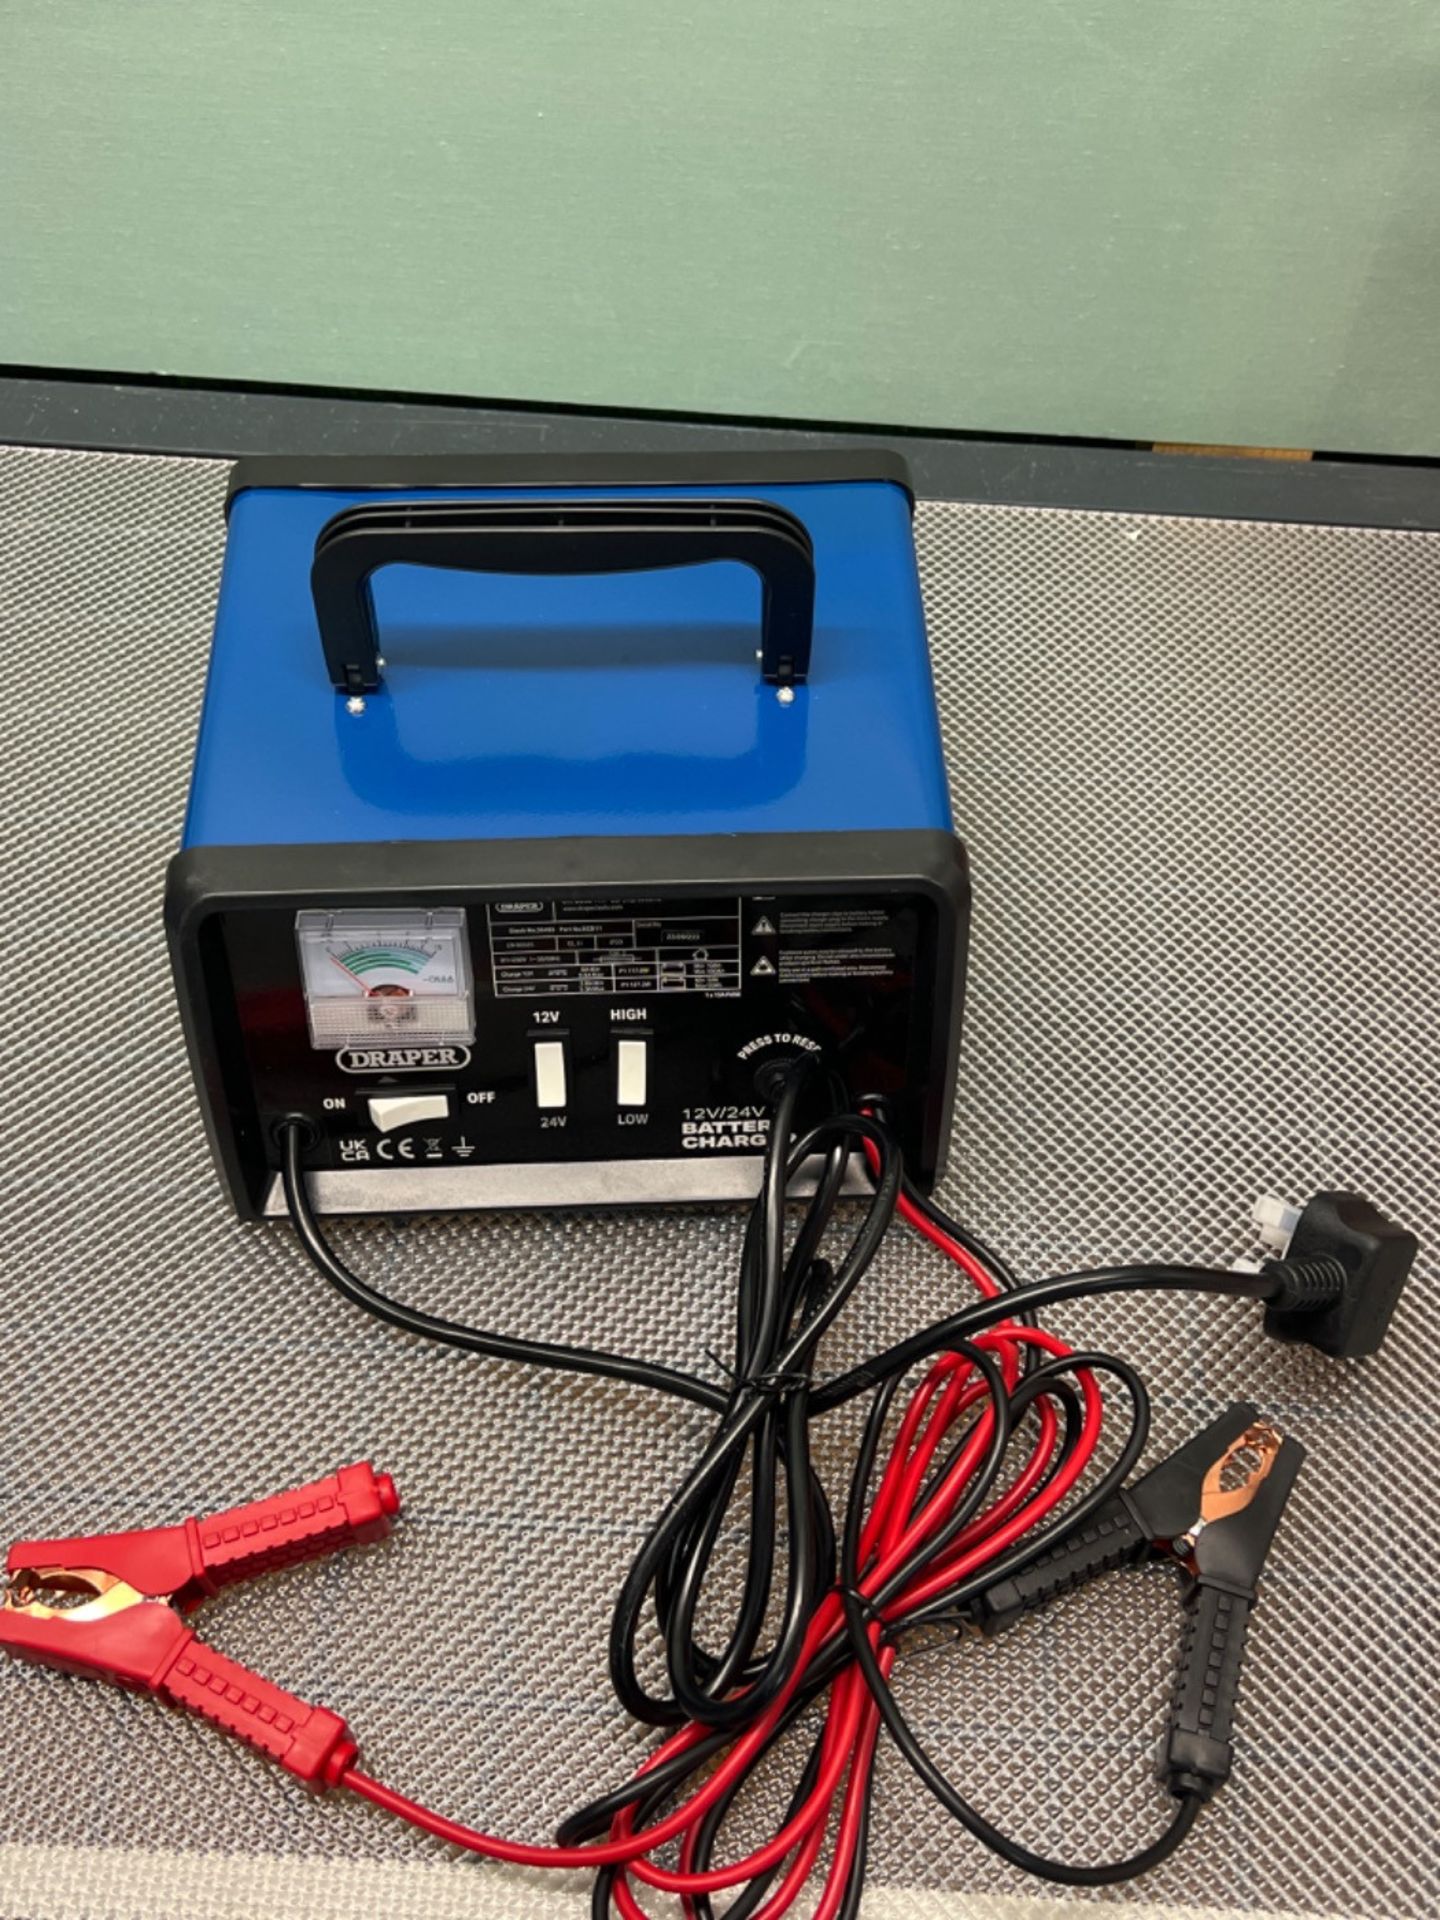 Draper 20493 Battery Charger, 12/24V, 10.3A - Image 3 of 3